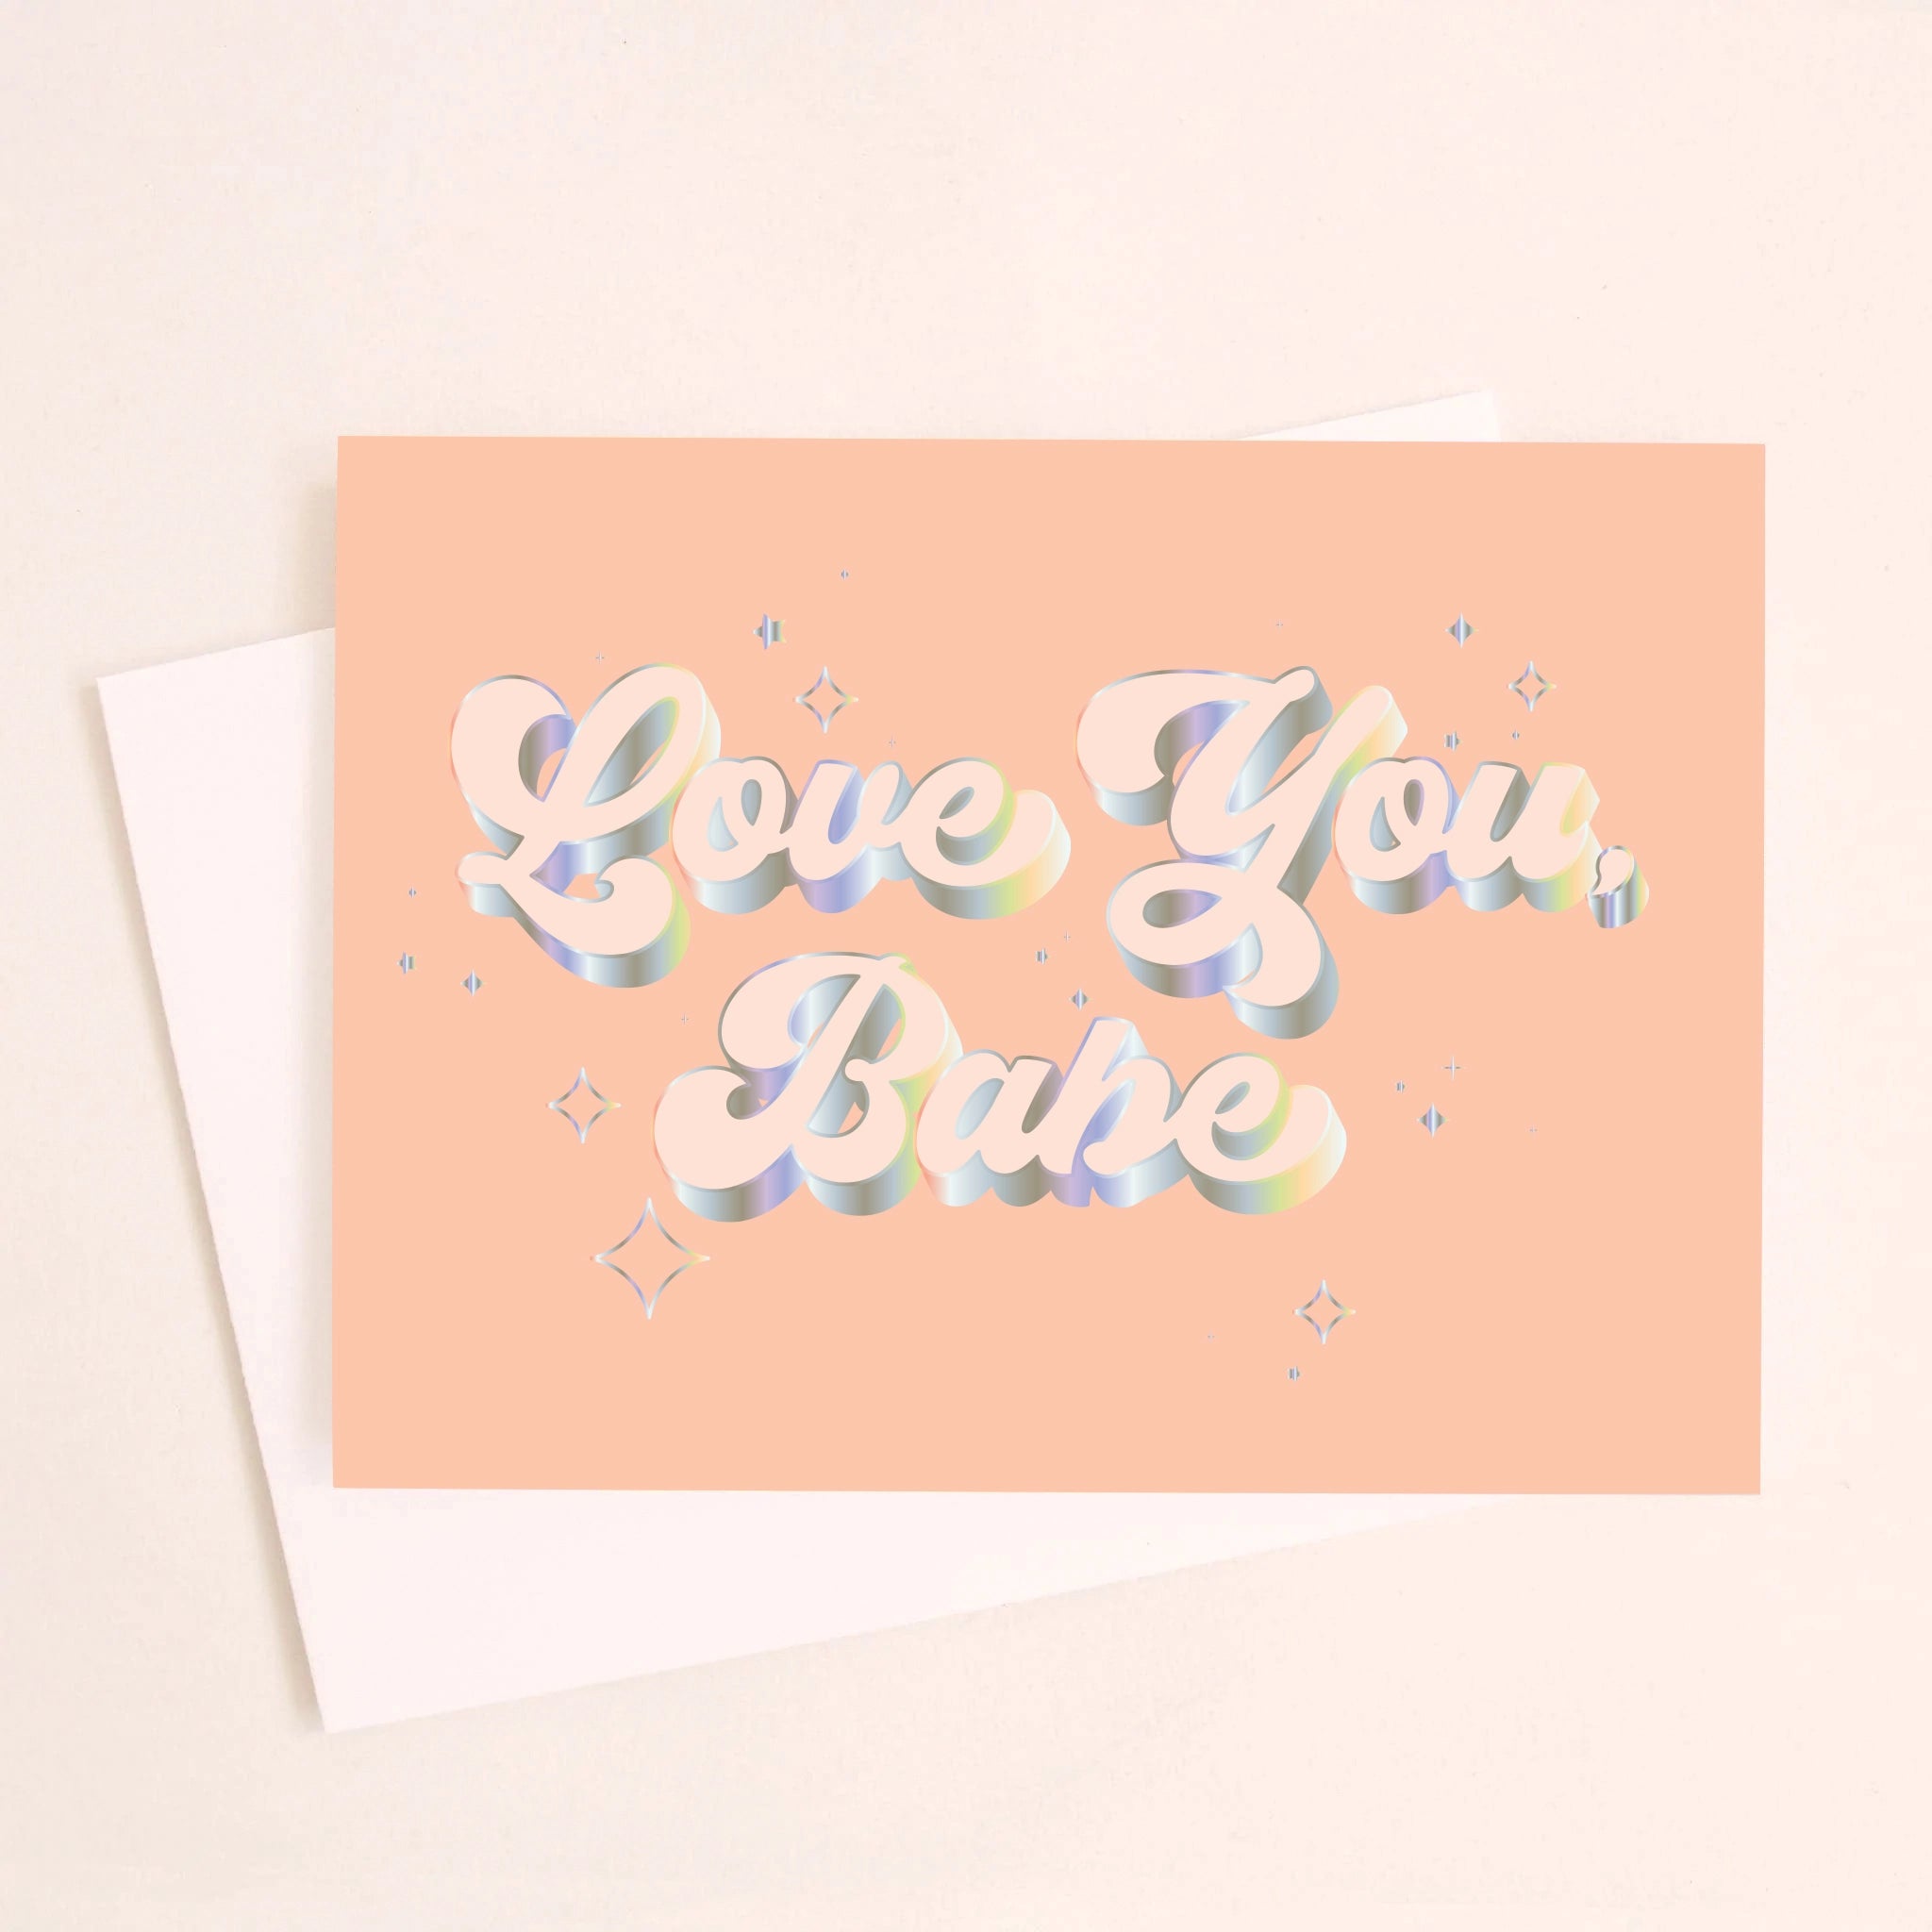 On a light peach background is a peachy greeting card with &quot;Love You Babe&quot; text in the center that is outlined with holographic foil detailing. Also included is a white envelope.